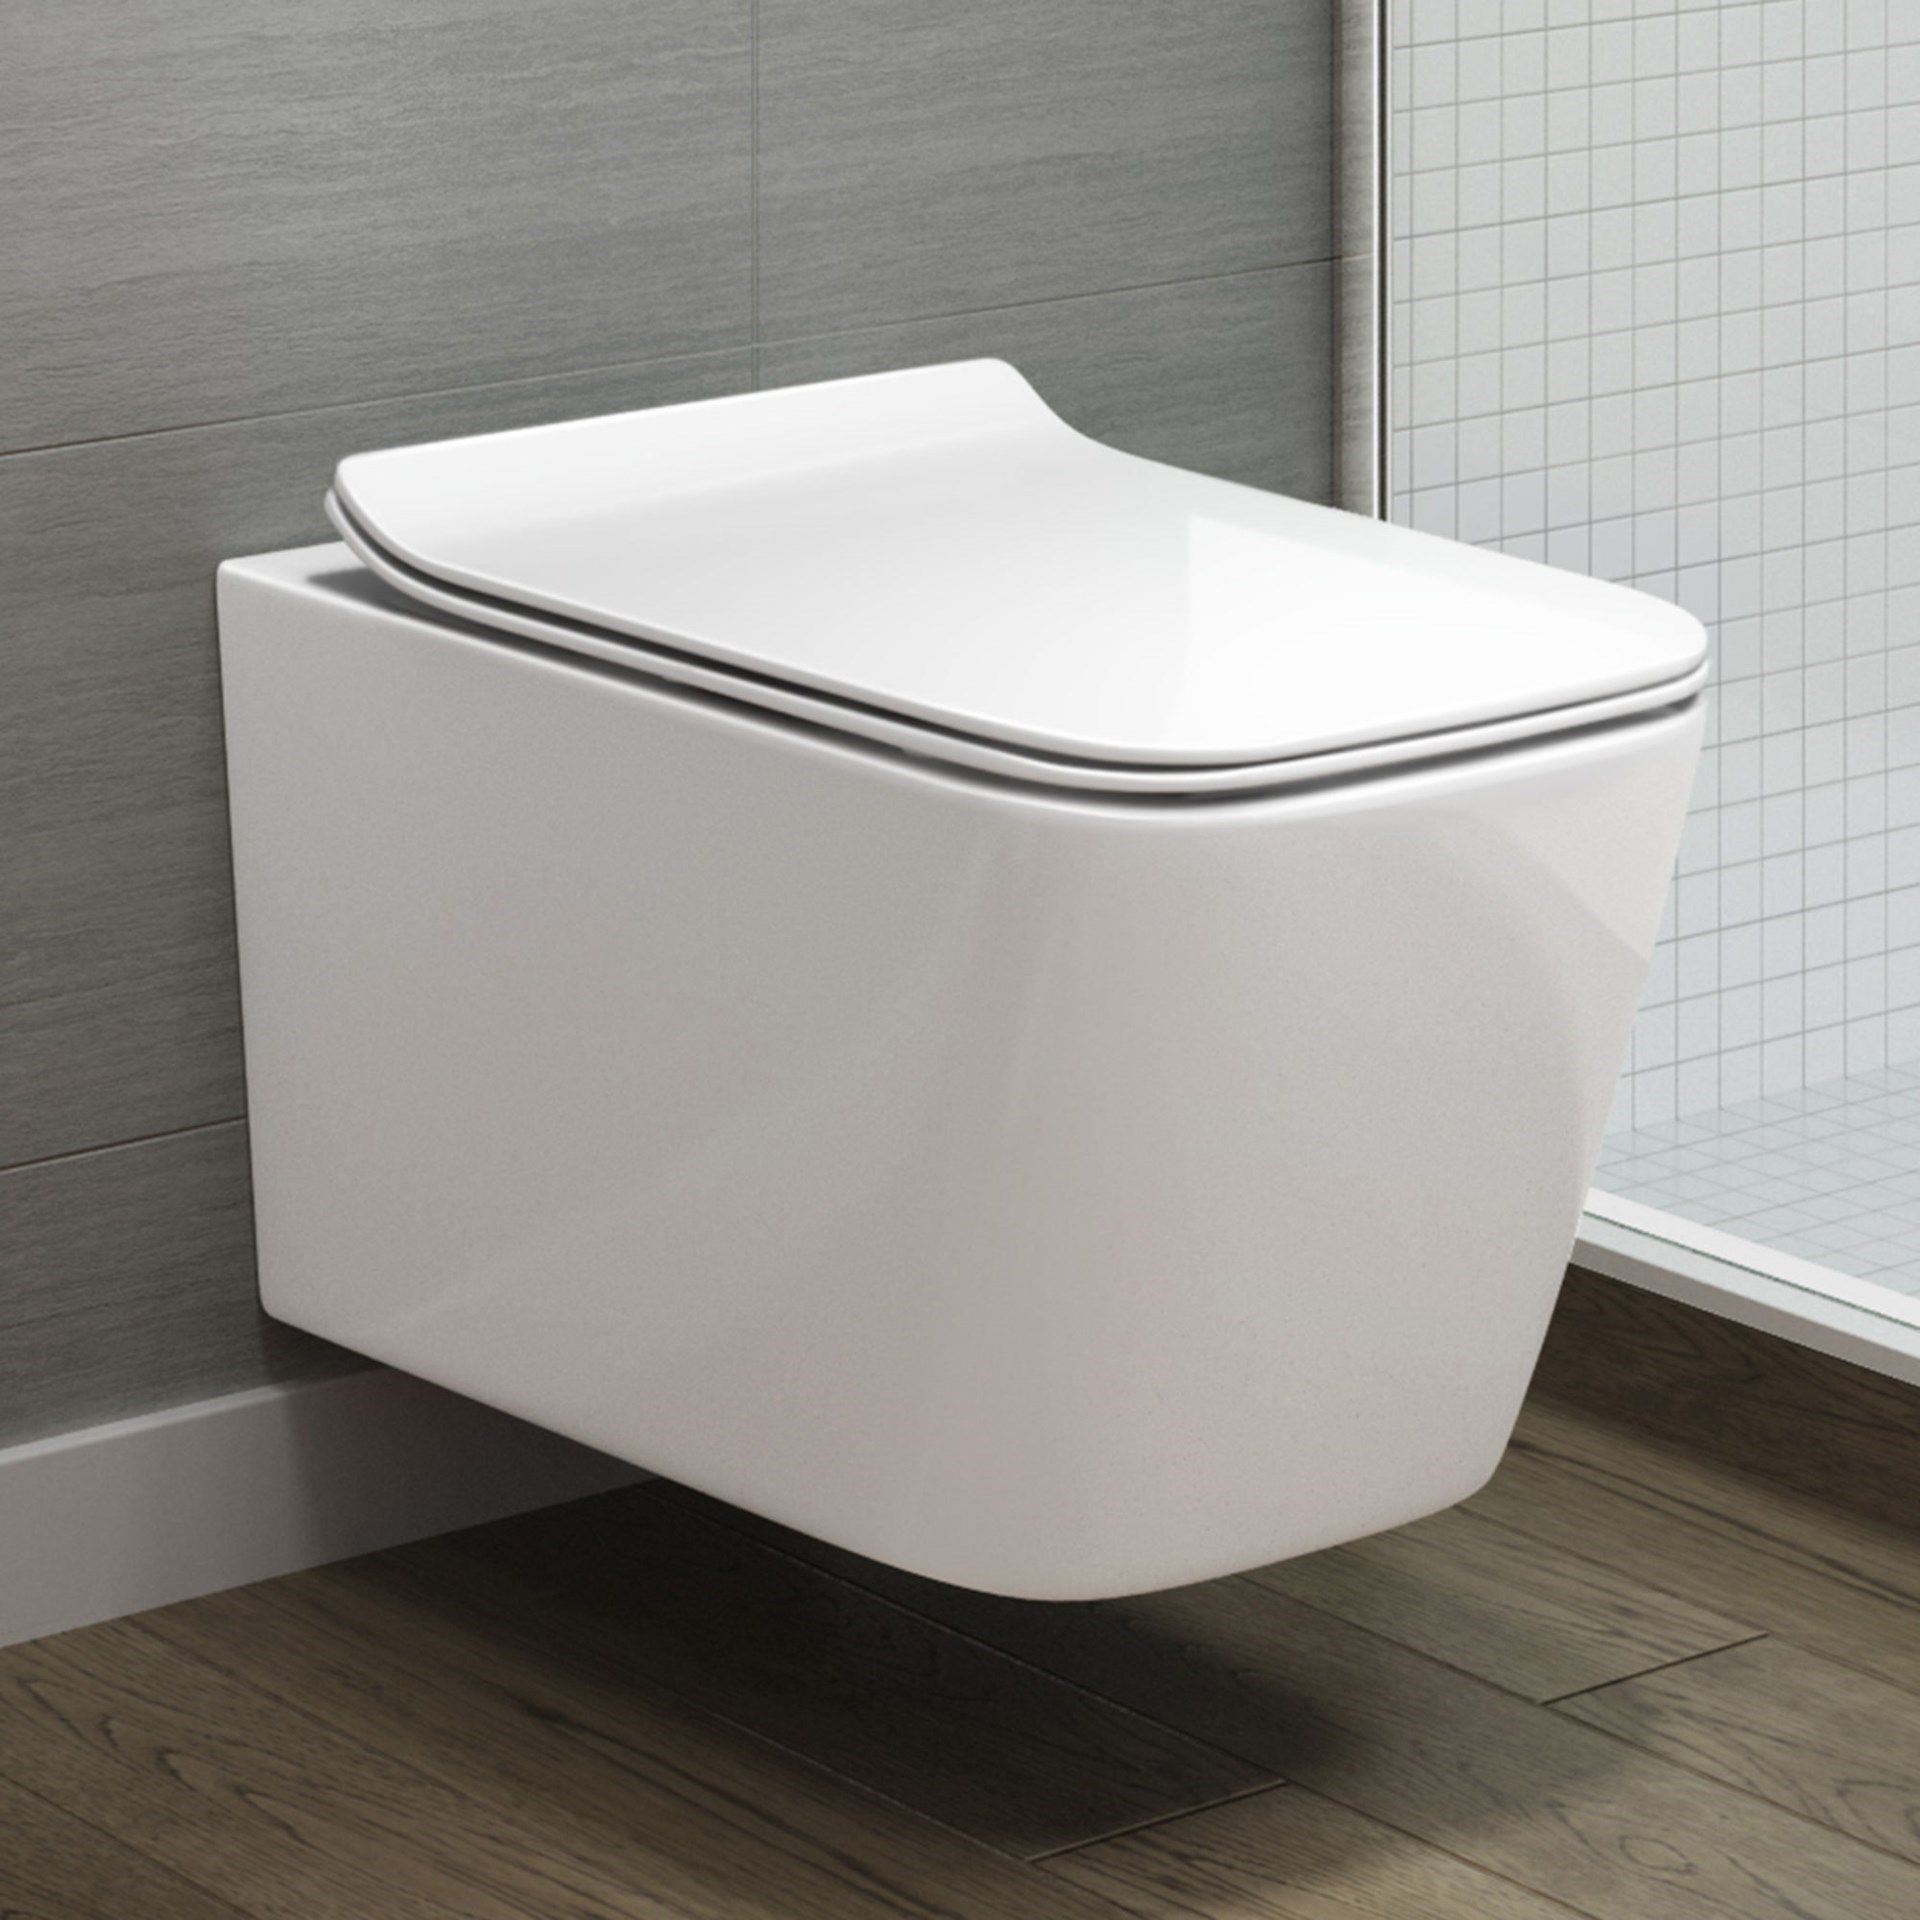 BRAND NEW BOXED Florence Wall Hung Toilet inc Luxury Soft Close Seat. RRP £349.99.Made from Wh...